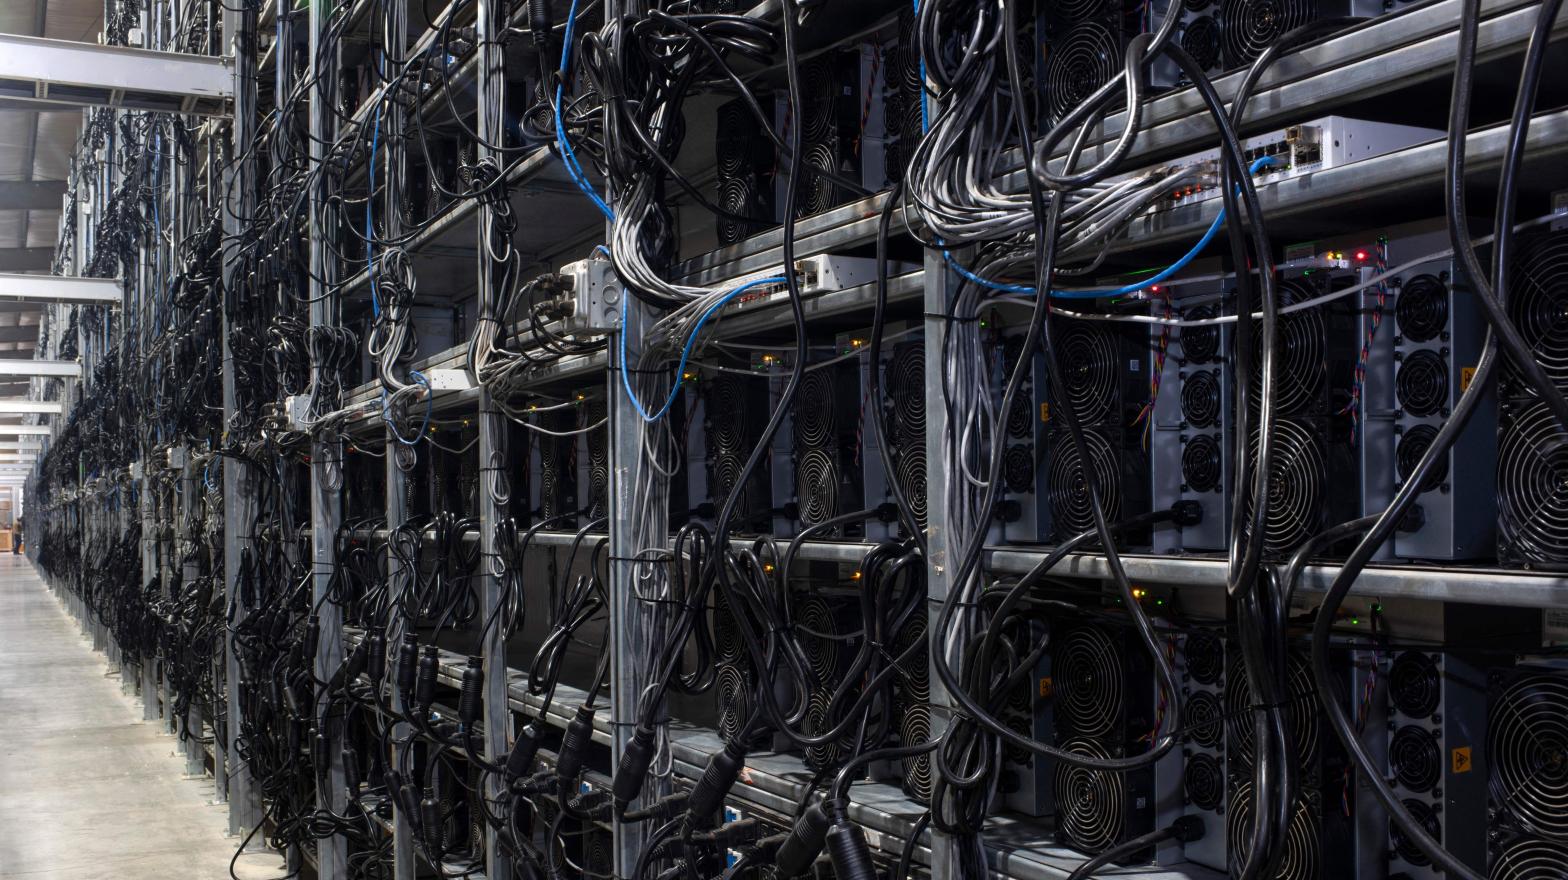 The bitcoin mining machines in the Whinstone Bitcoin mining facility in Rockdale, Texas, owned and operated by Riot Blockchain. (Photo: MARK FELIX/AFP /AFP, Getty Images)